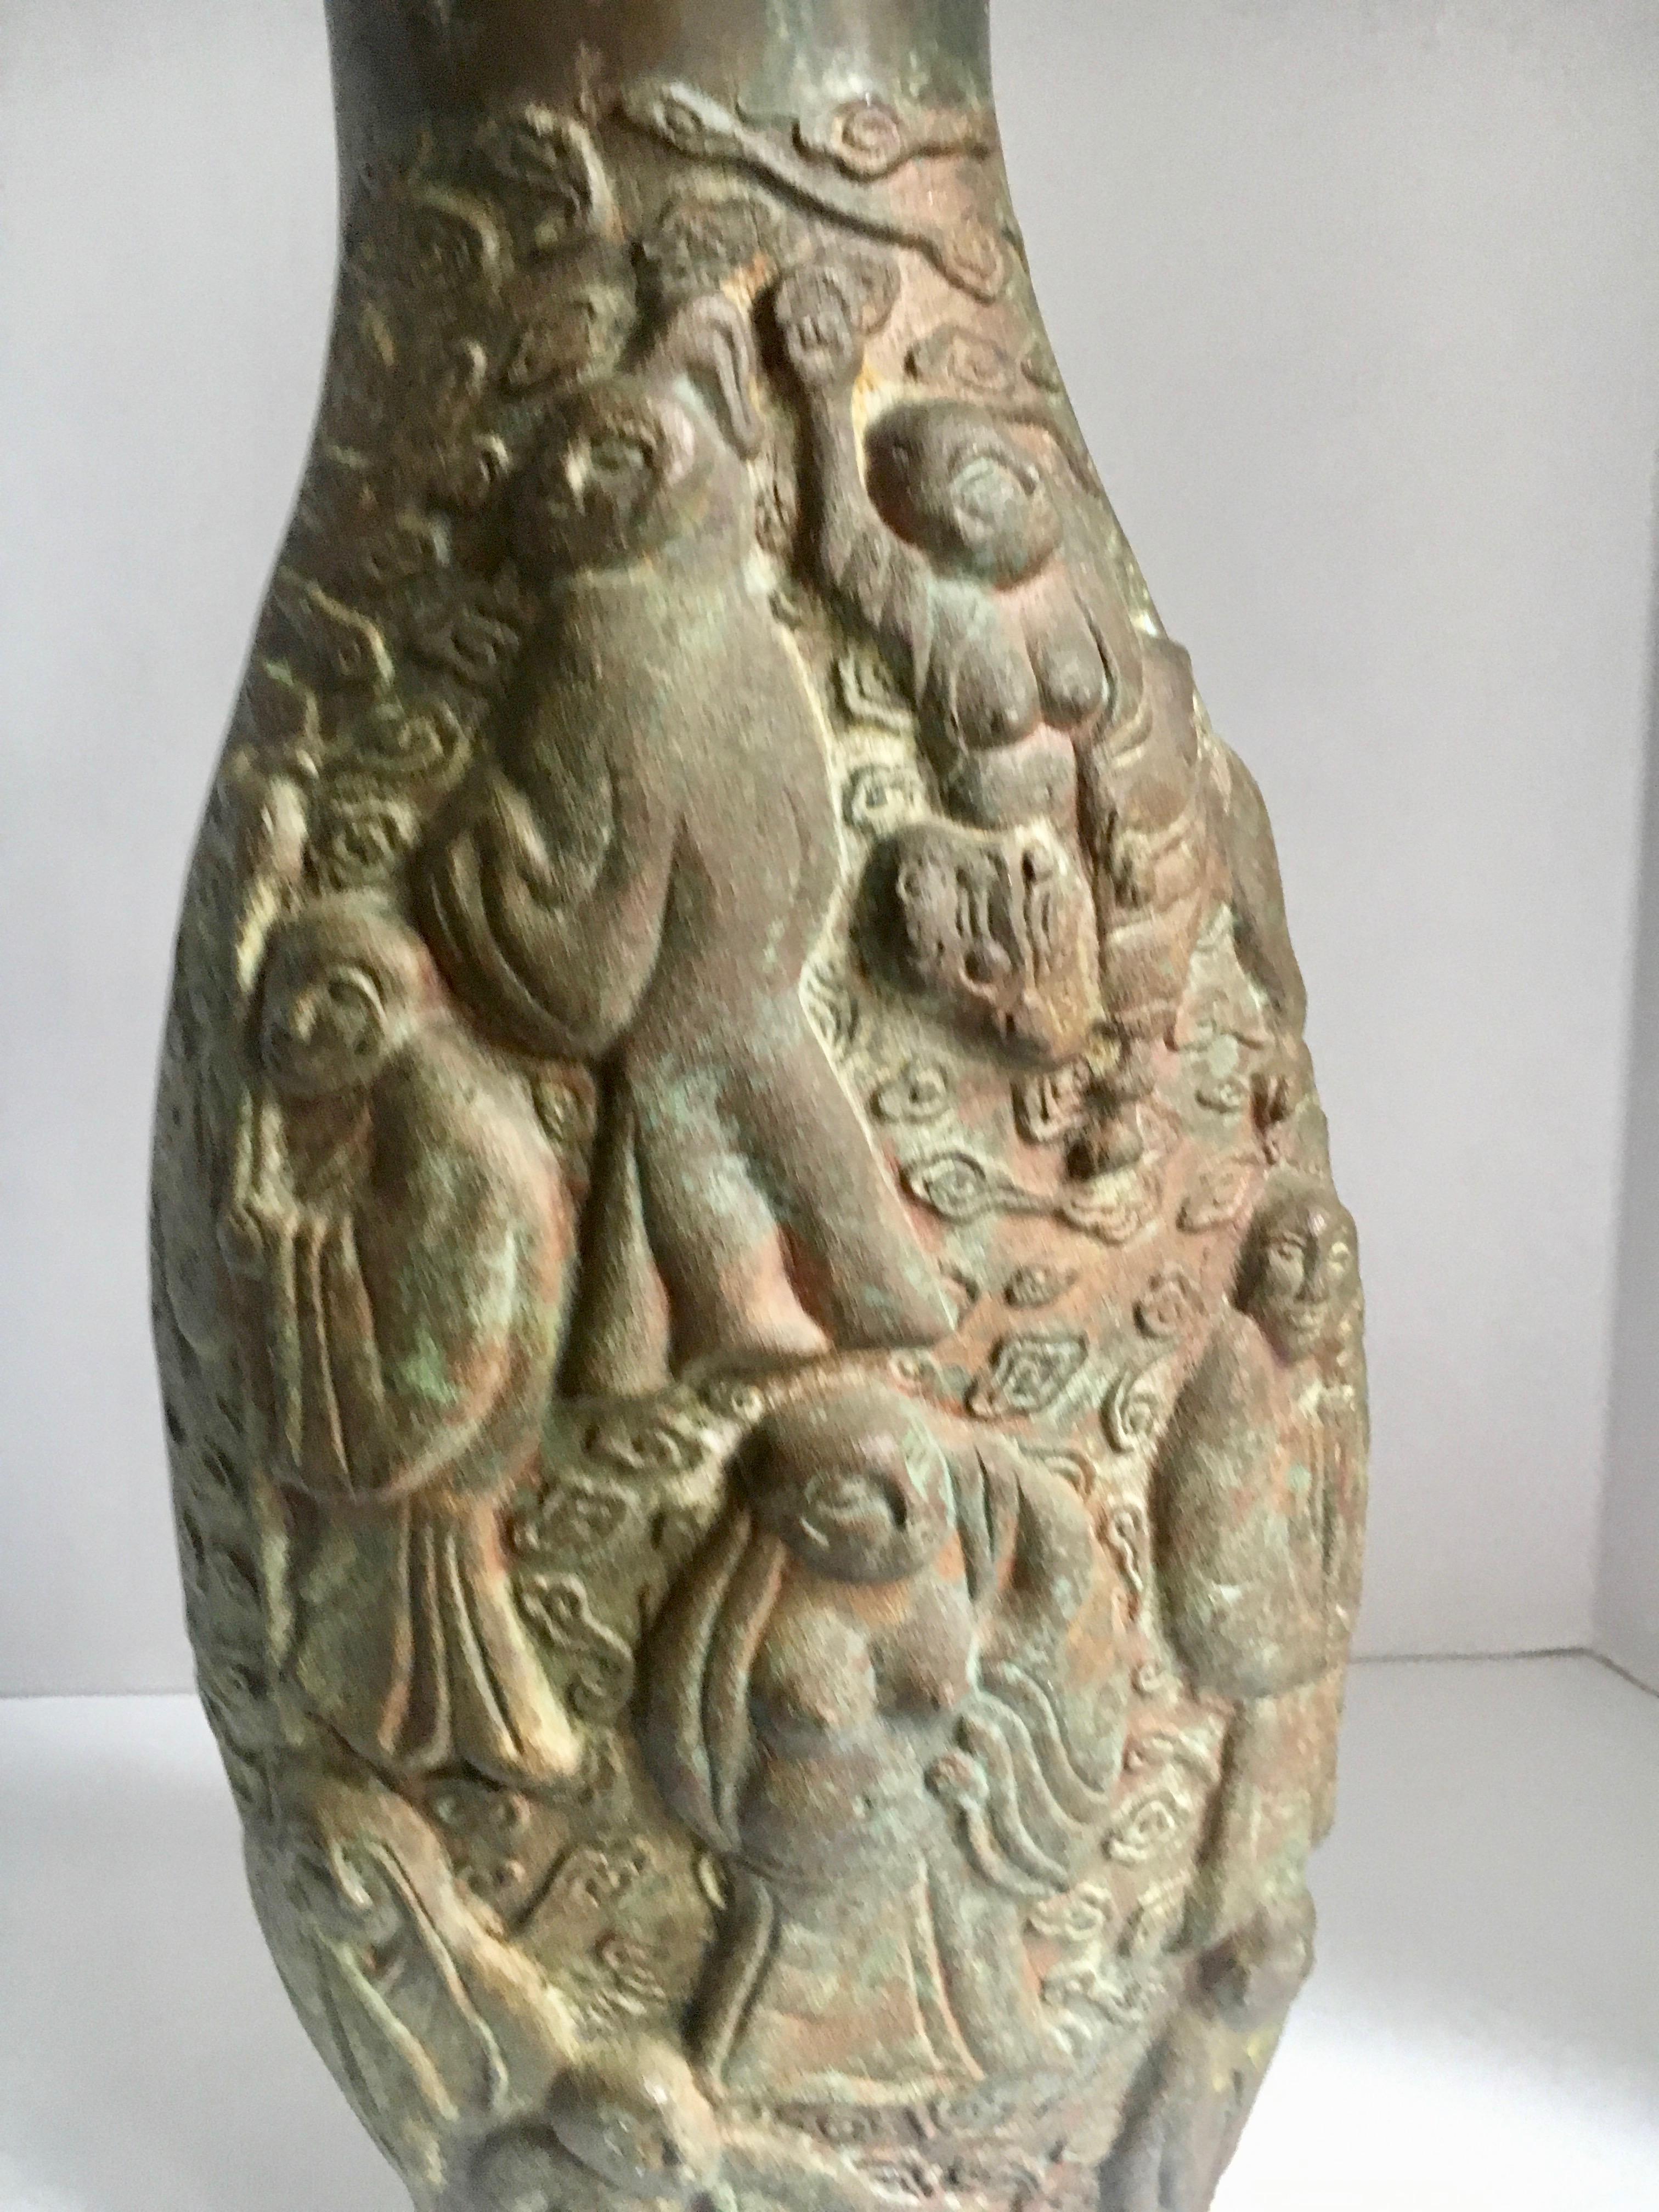 Chinese bronze vase with 10 figures - Not certain of age, but works well in any setting and water tight. A very heavy (17 lbs) piece. Beautifully made, functional as a piece of art or practical as an impressive vase.